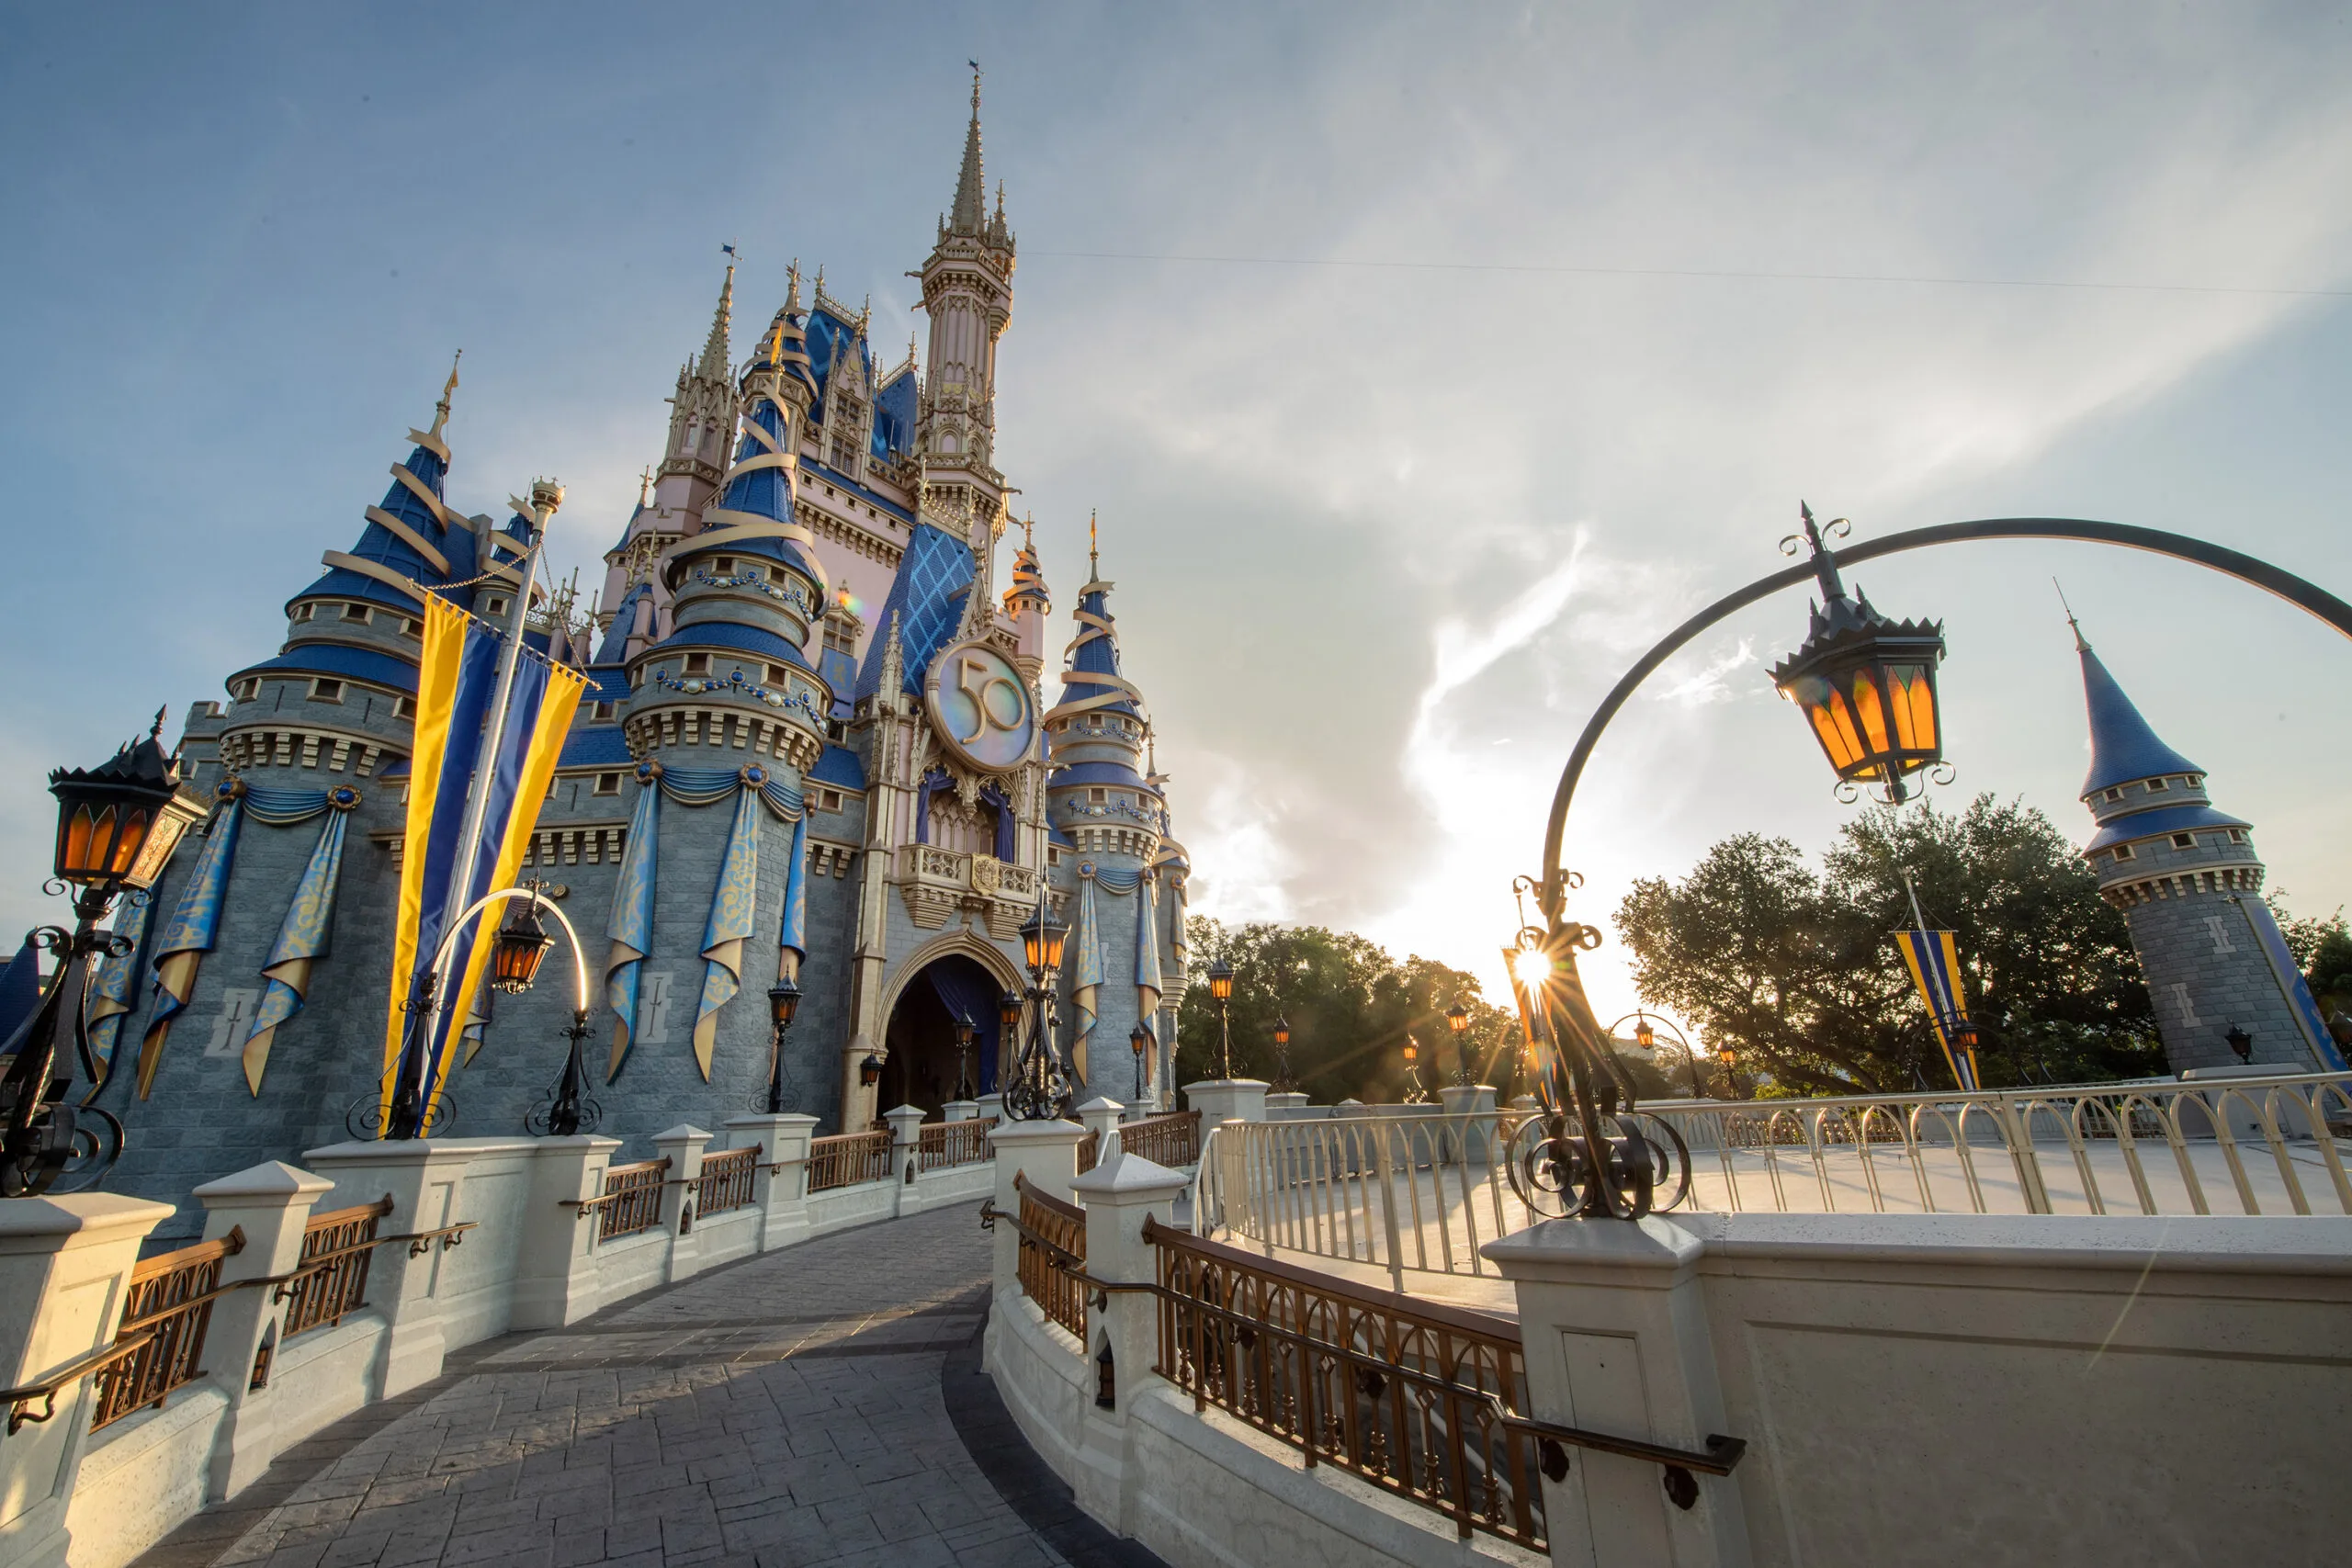 8 Creative Ways to Upgrade Your Next Disney Vacation Without An Upcharge